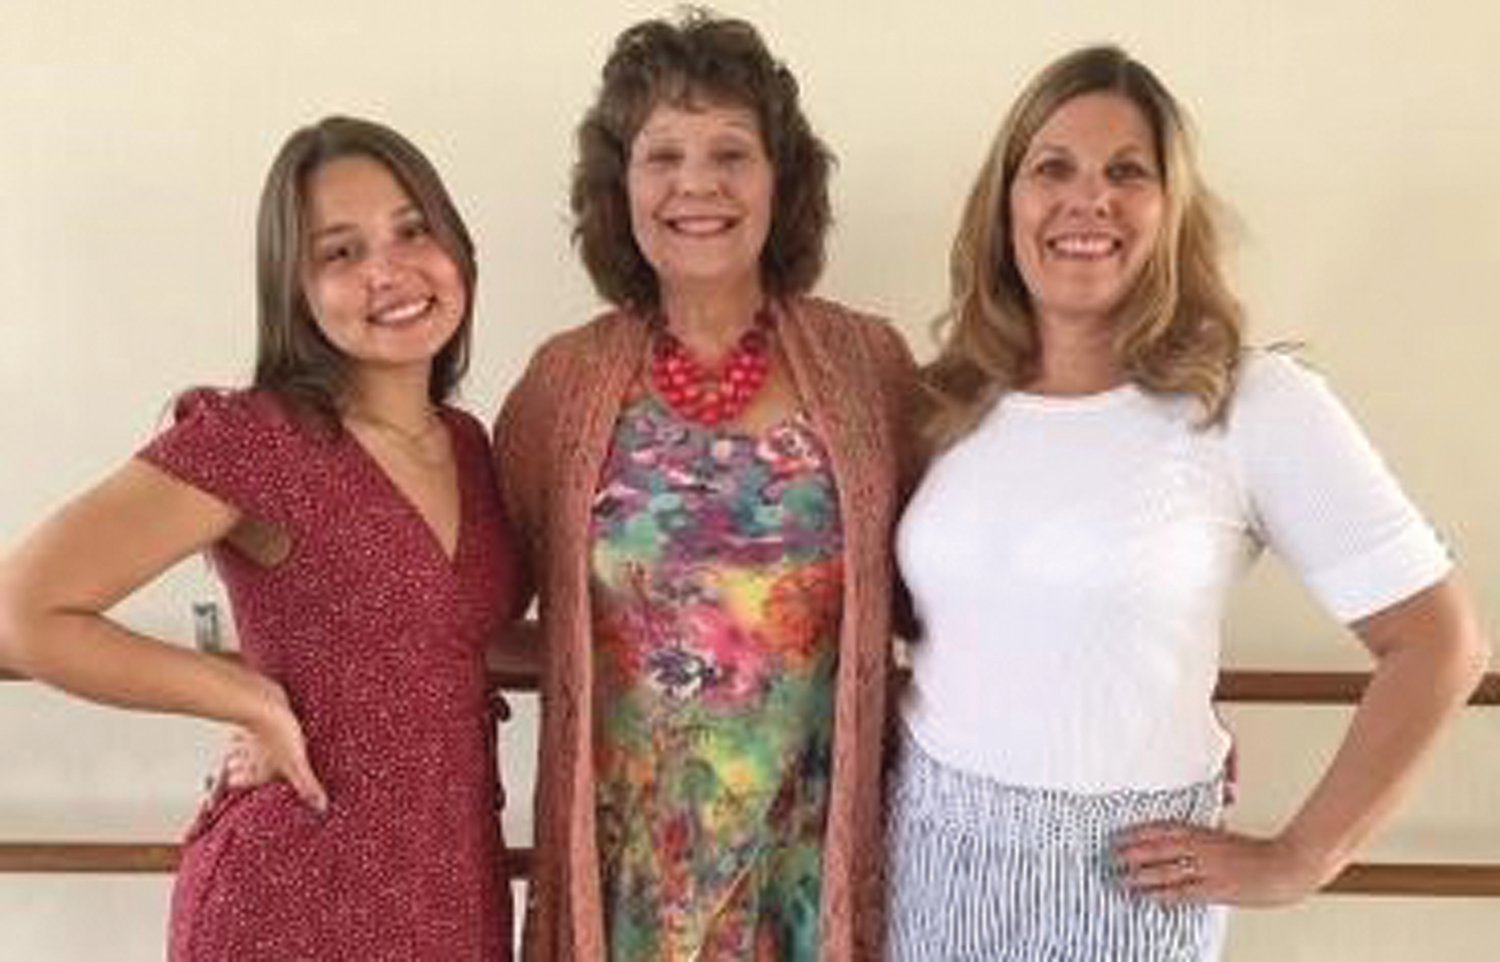 Three generations of dancers—Cynthia Johnston (center), founder of Miss Cindy’s School of Dance, is flanked by granddaughter Alexis Harlow, left, and daughter Tara Harlow.